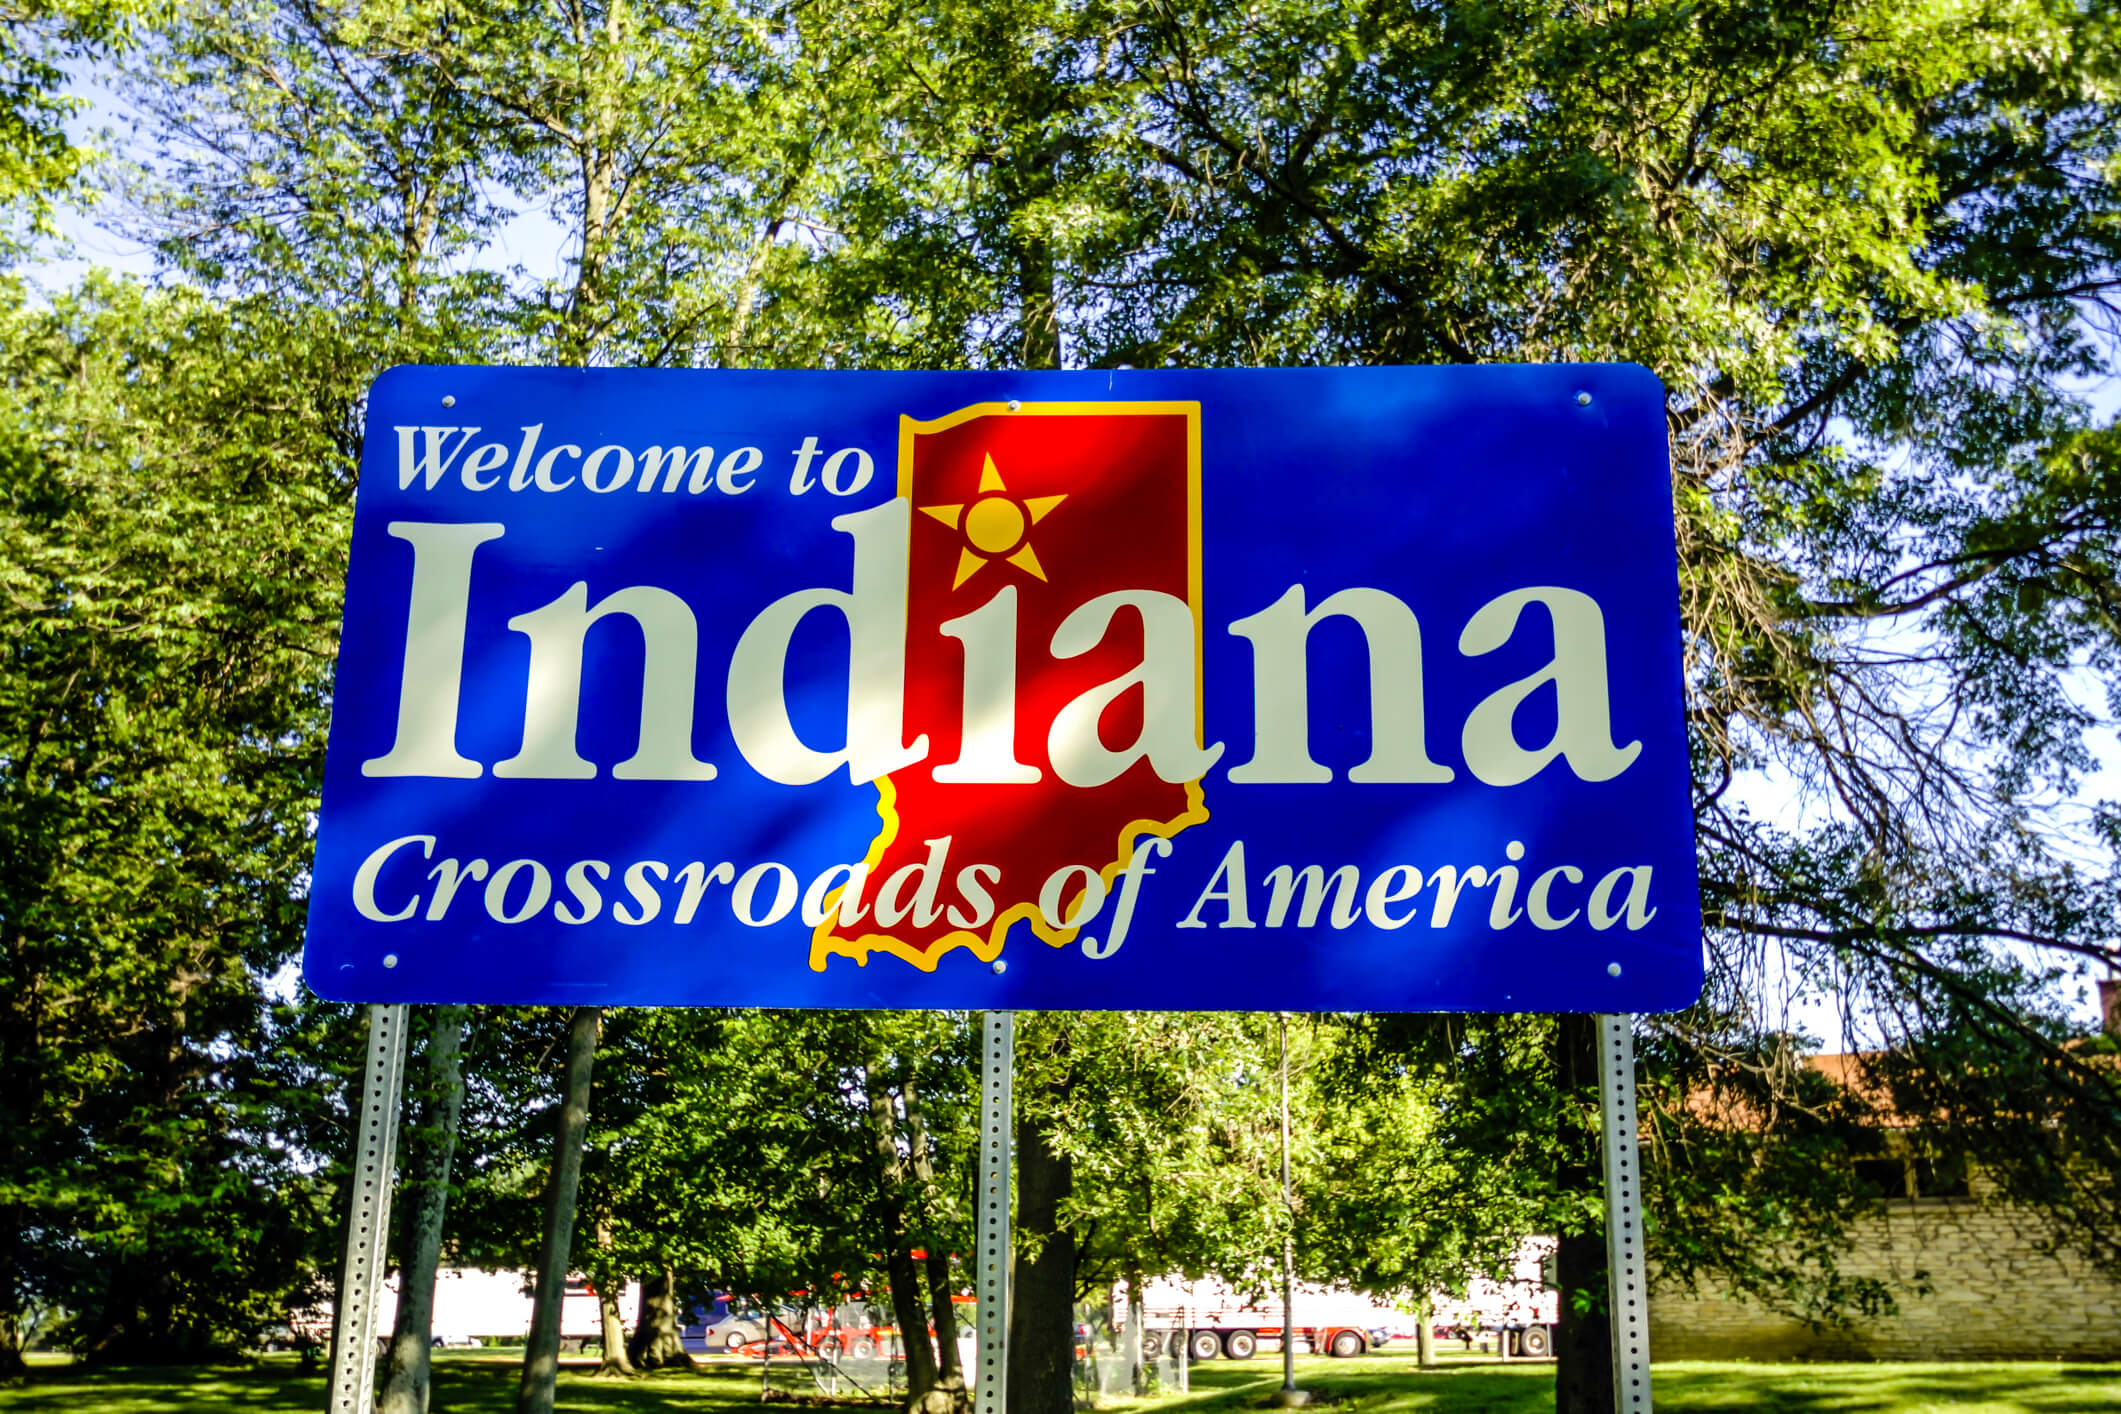 Indiana welcome sign